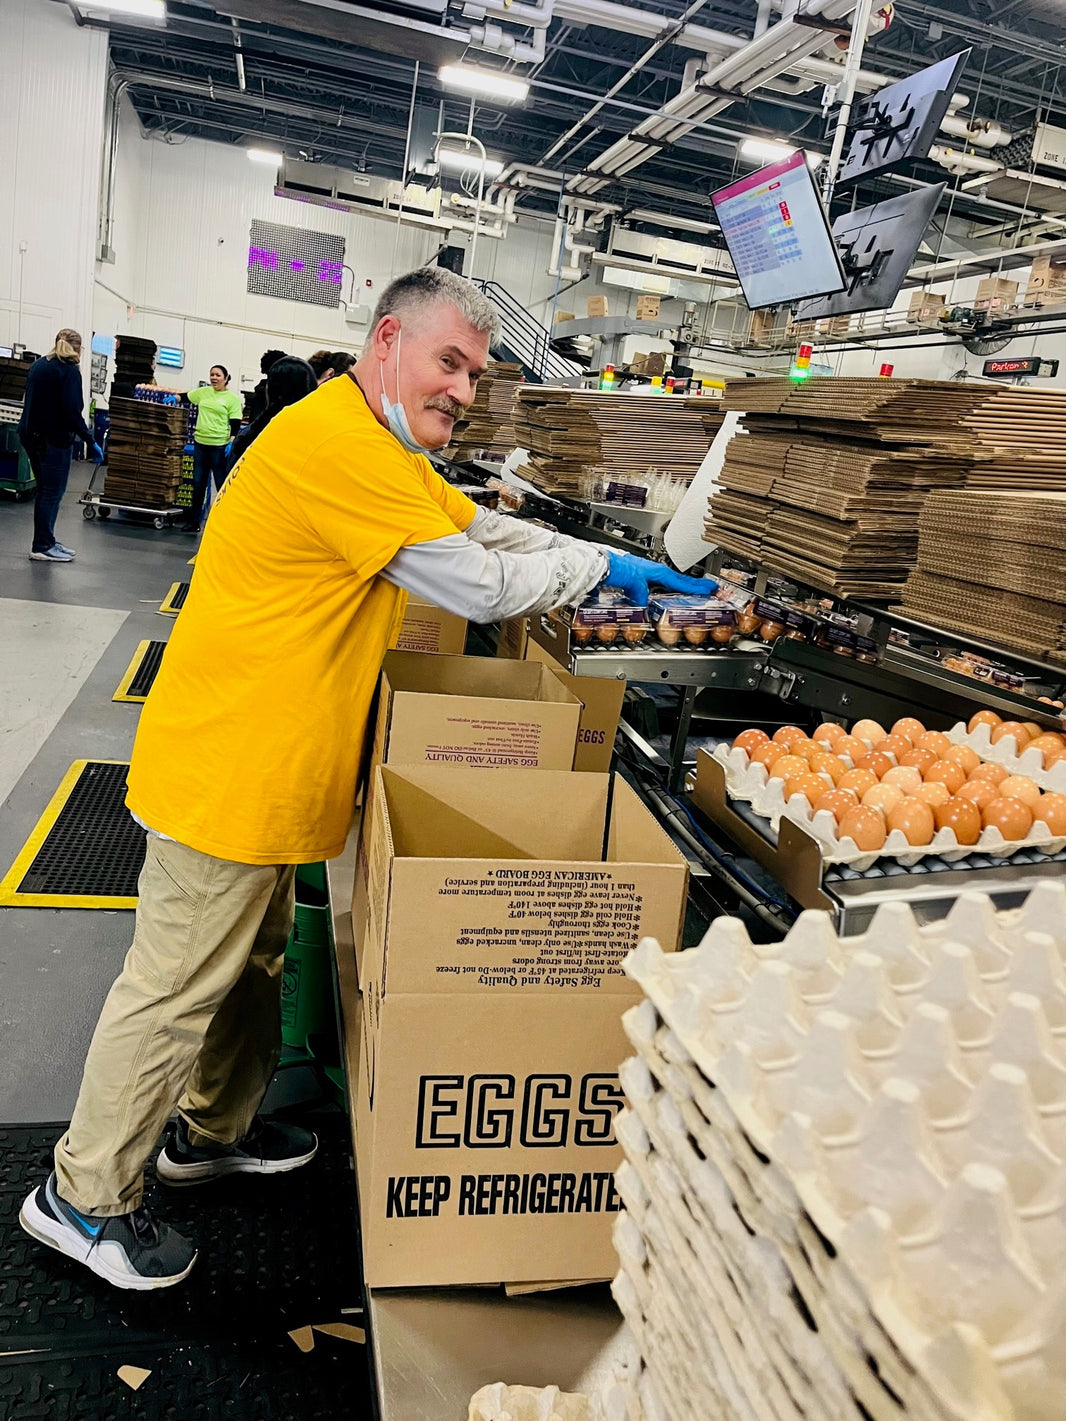 A man loading cartons of eggs in a warehouse